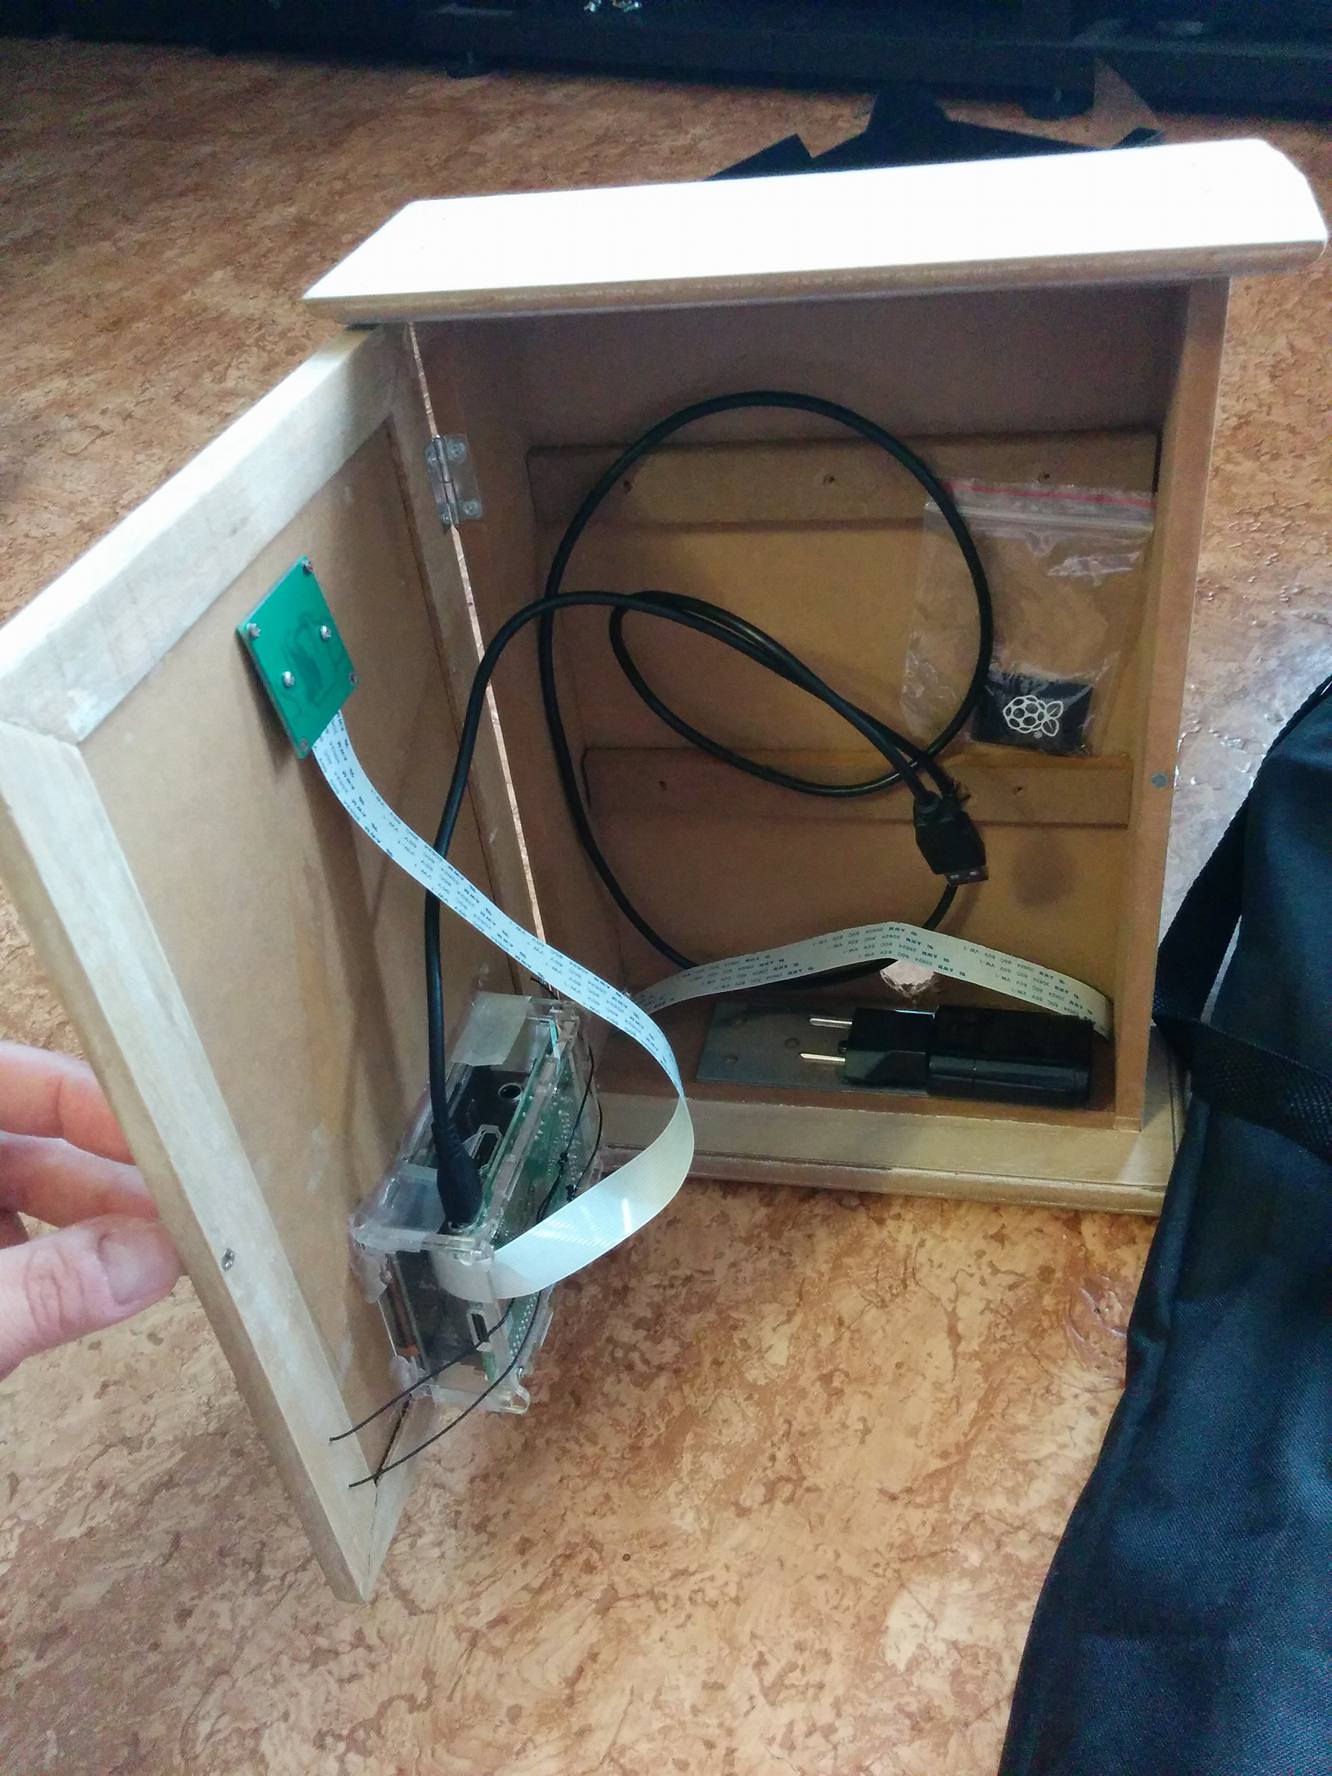 Hot glue and straps to hold things in place. The door provides easy maintenance access and insight for the technically curious.